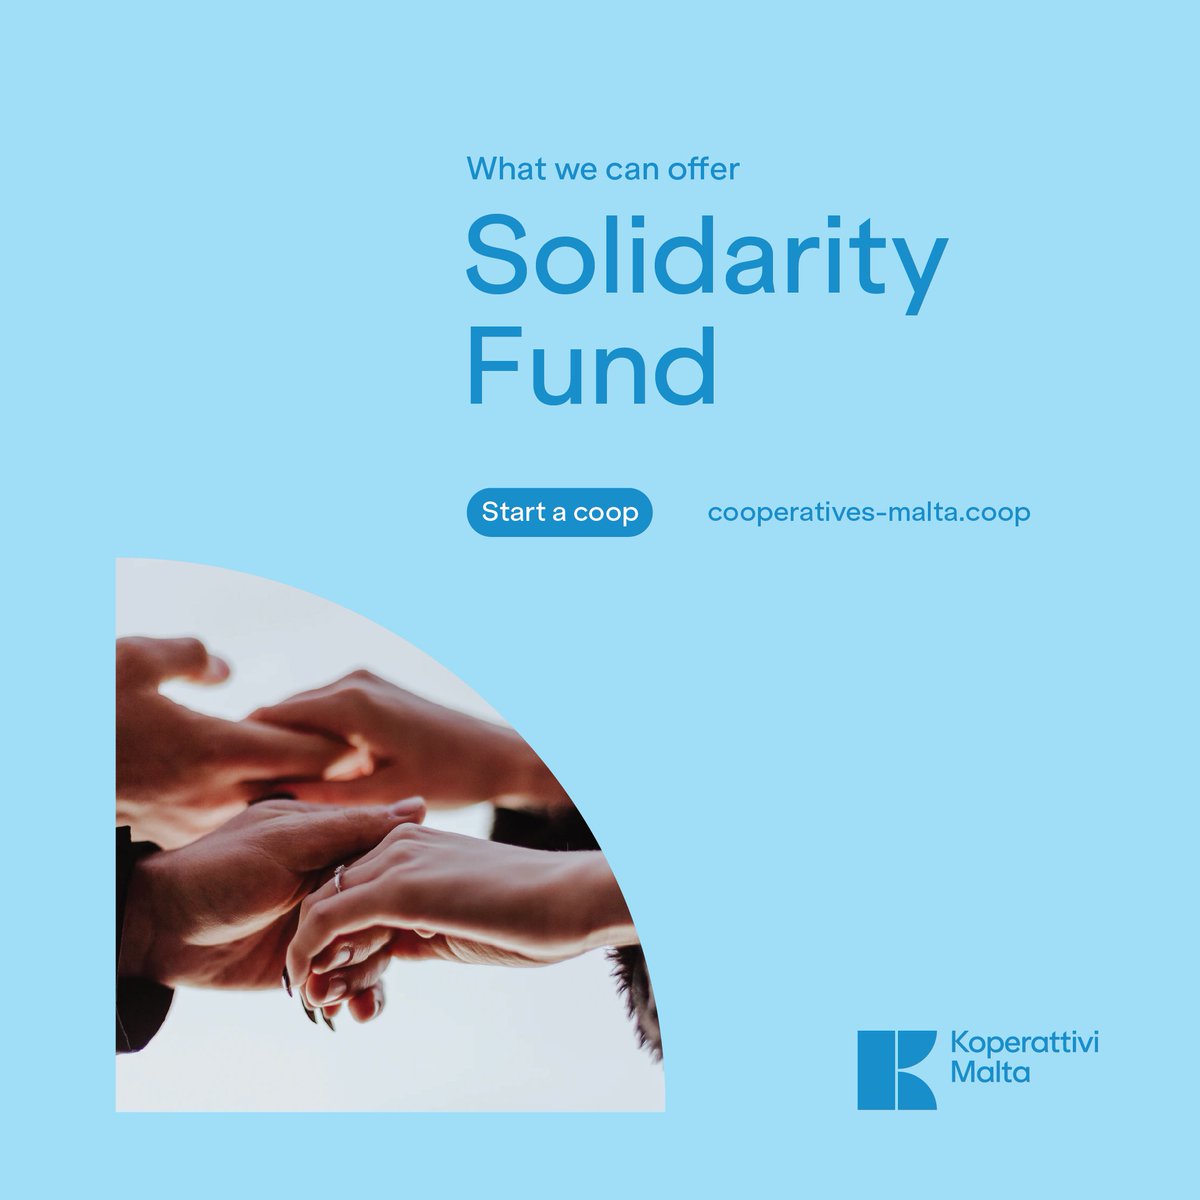 🧑‍🤝‍🧑@koperattivi Malta 🇲🇹 is leveraging the power of the community establishing its own Solidarity Fund to support #cooperatives in need.

A true #PeopleFirst initiative that can provide a safety net in times of economic uncertainty. 👏

More about this👇
https://t.co/JzXtxJG61D 